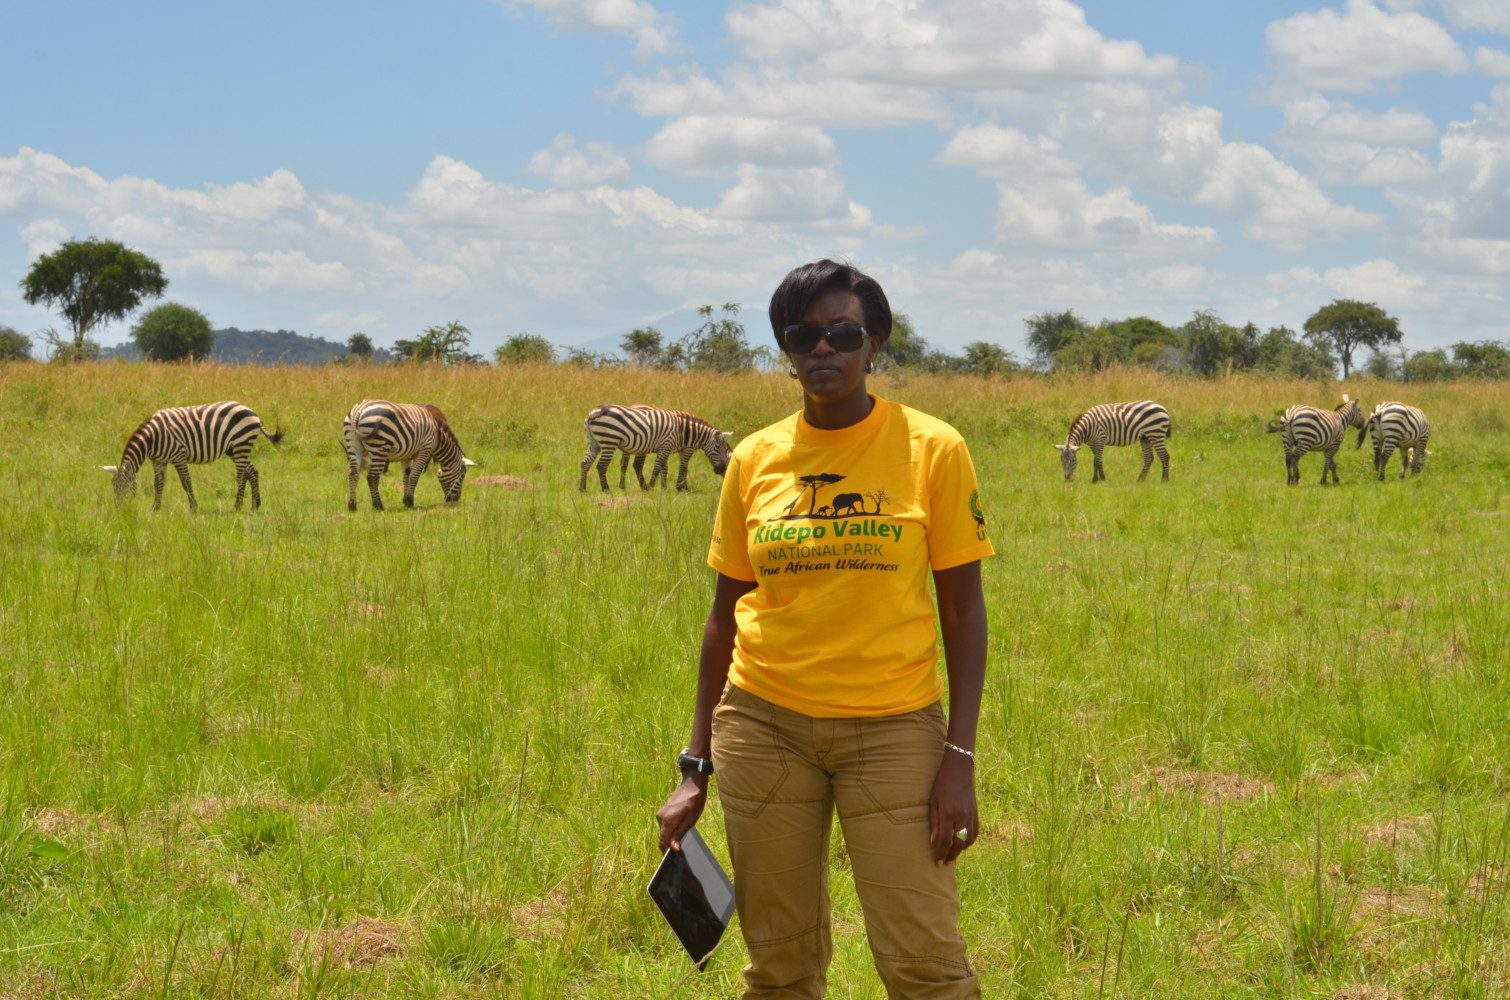 Ingrid Nyonza Nyakabwa has extensive experience in conservation and tourism management in Uganda.